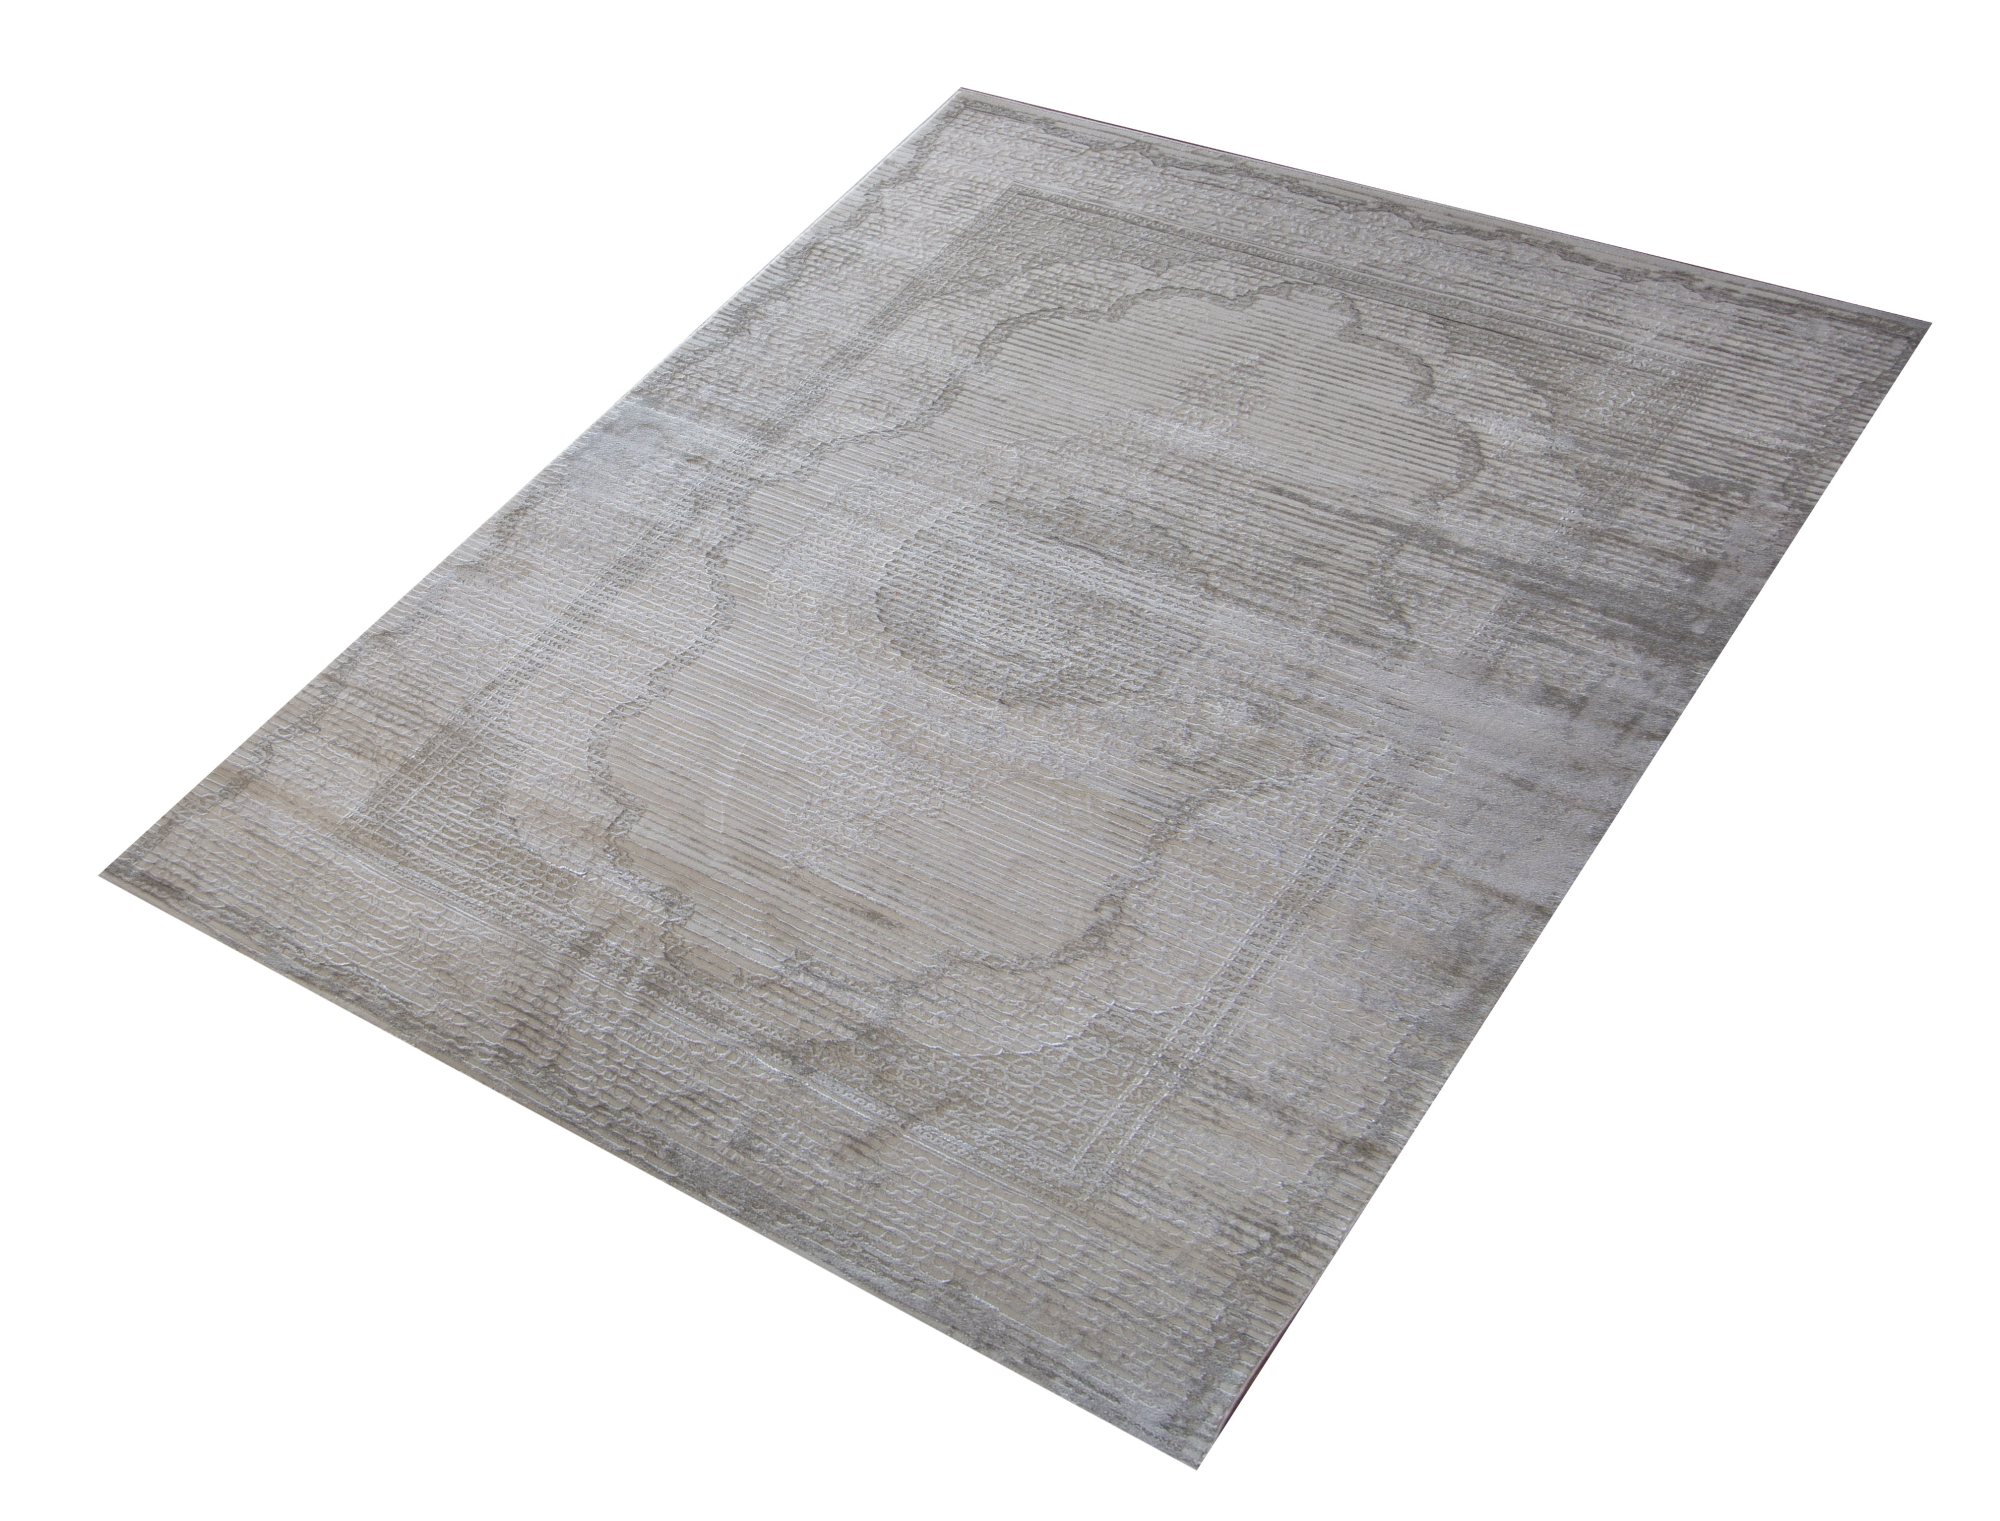 Mystic 8974 Taupe Woven Rug-Area rug for living room, dining area, and bedroom